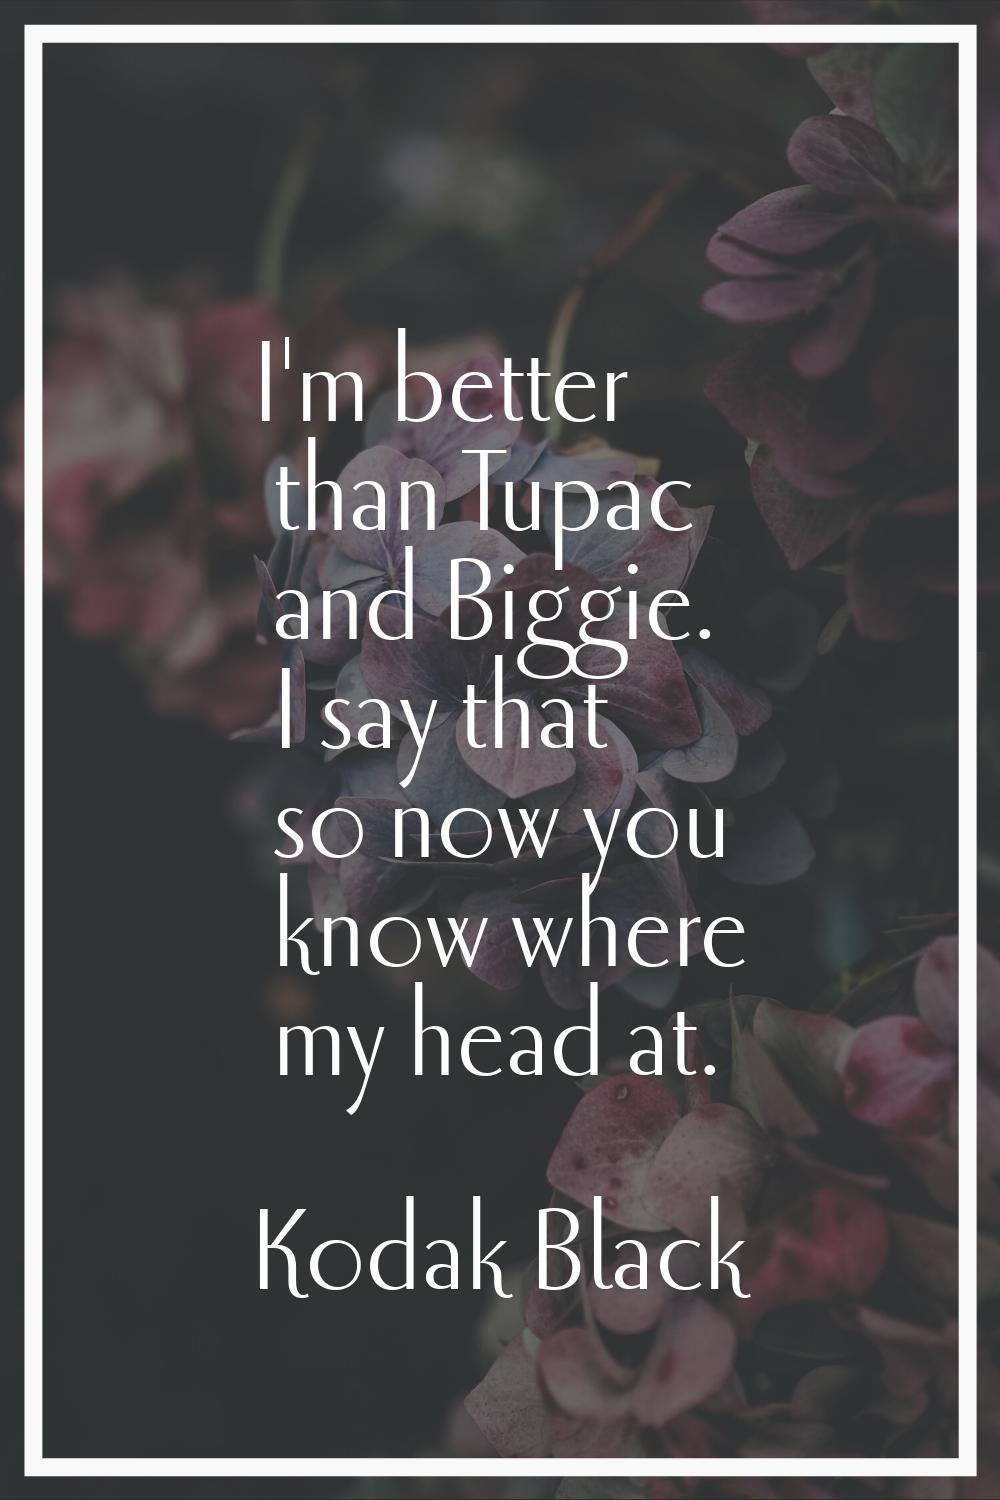 I'm better than Tupac and Biggie. I say that so now you know where my head at.